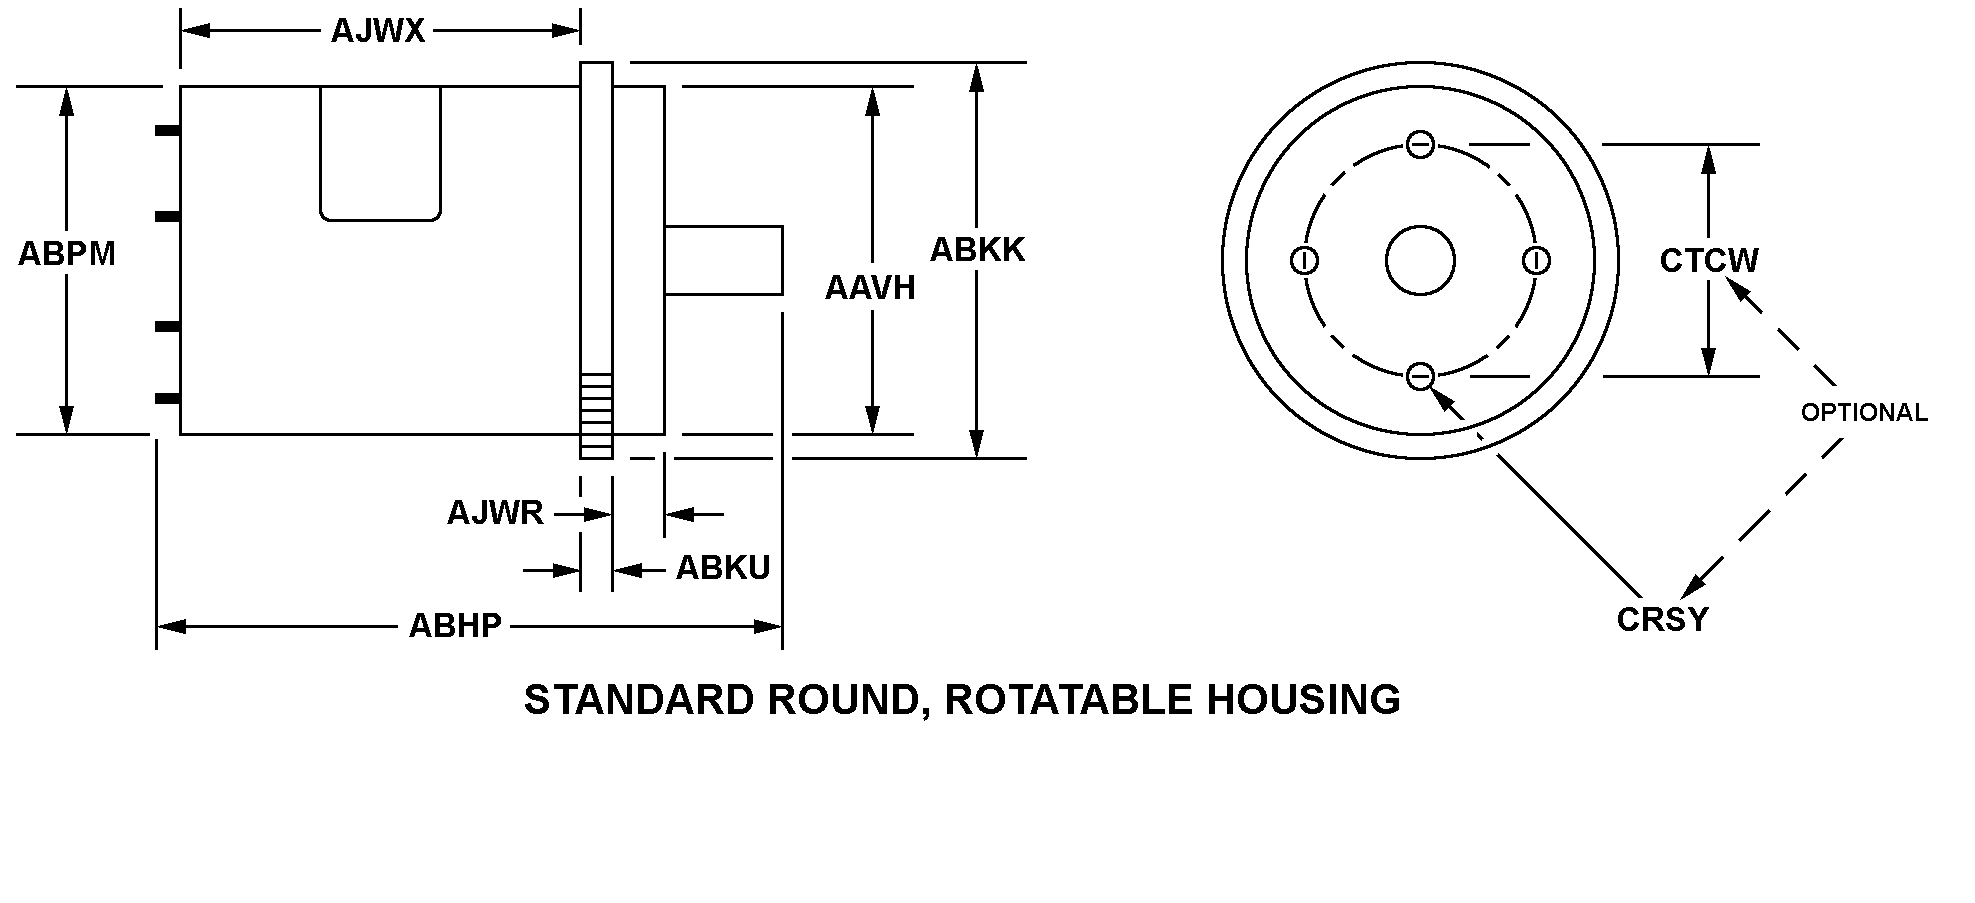 STANDARD ROUND, ROTATABLE HOUSING style nsn 5990-01-138-7984